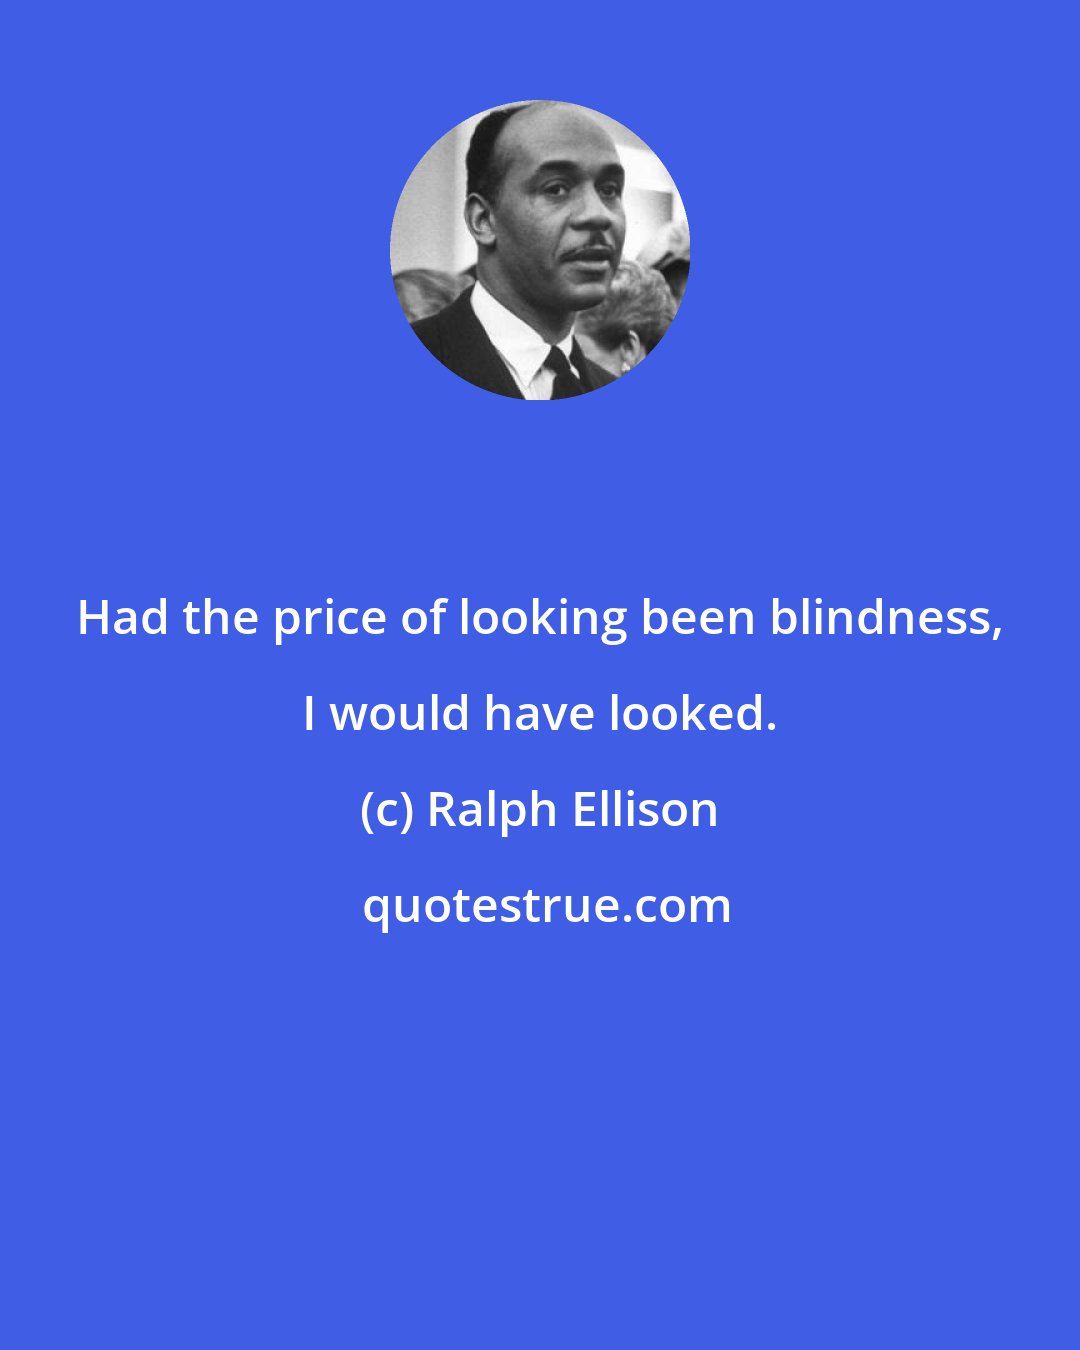 Ralph Ellison: Had the price of looking been blindness, I would have looked.